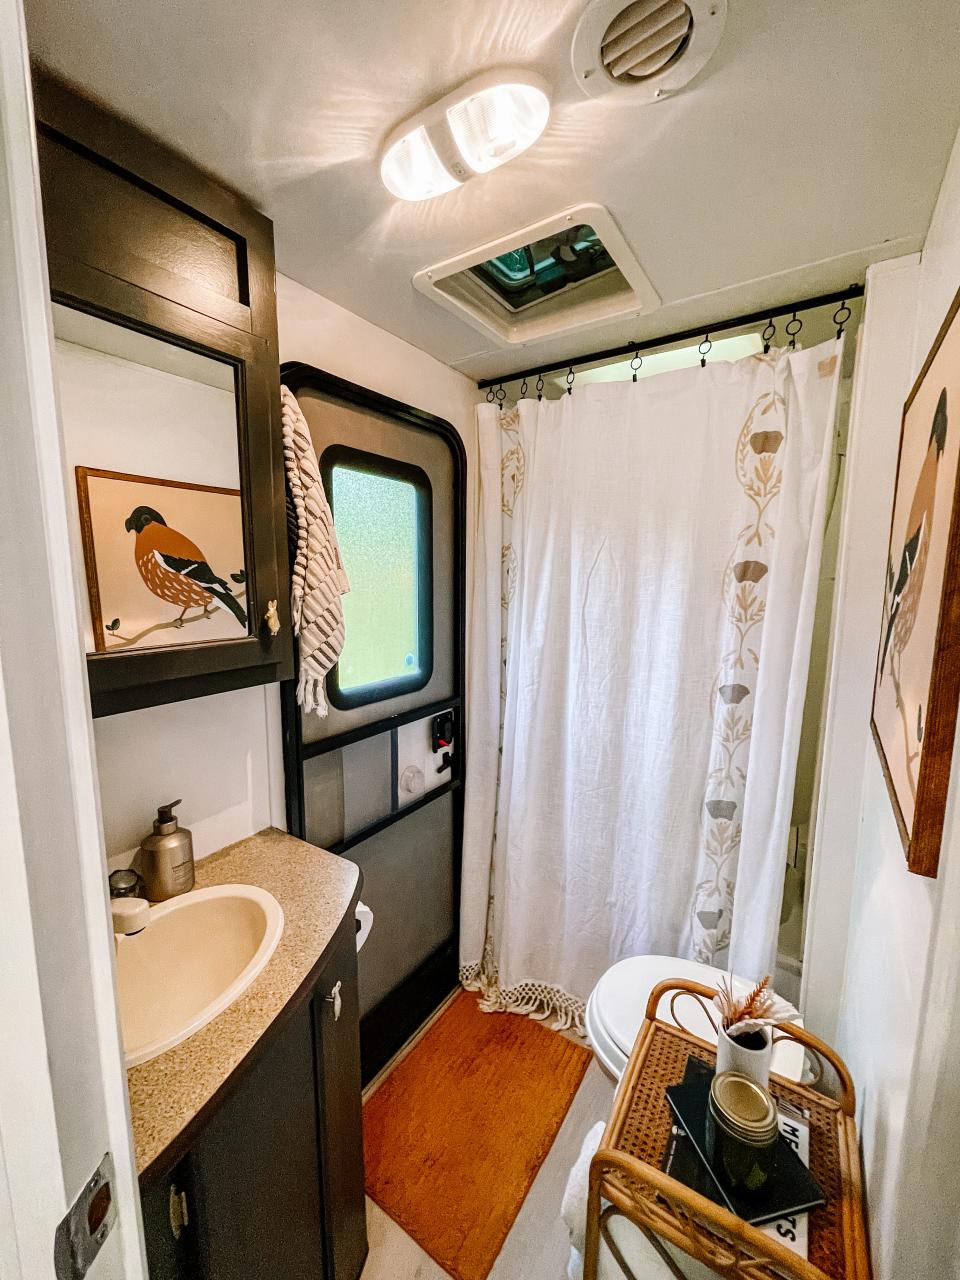 The bathroom is surprisingly spacious in this 2014 camper. Owner Kat Chandler painted a portrait of a finch as a tribute to the camper’s name. Fountain City, April 14.